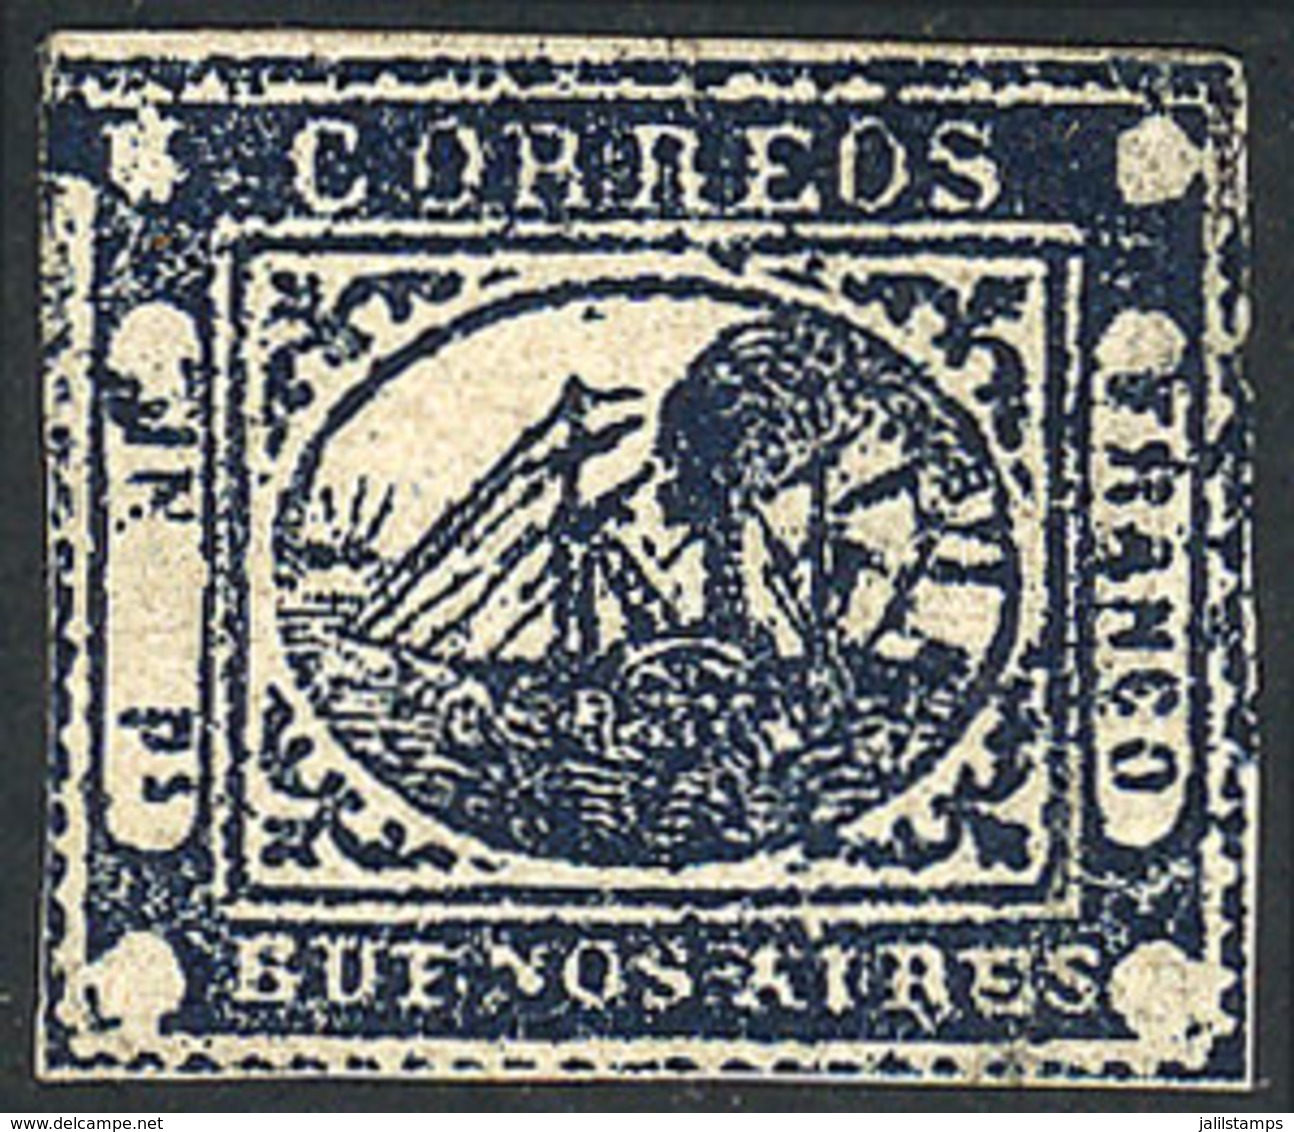 ARGENTINA: GJ.11C, IN Ps. Indigo Blue, With Small Repaired Cut, Very Good Front, Handsome Example, Catalog Value US$300 - Buenos Aires (1858-1864)